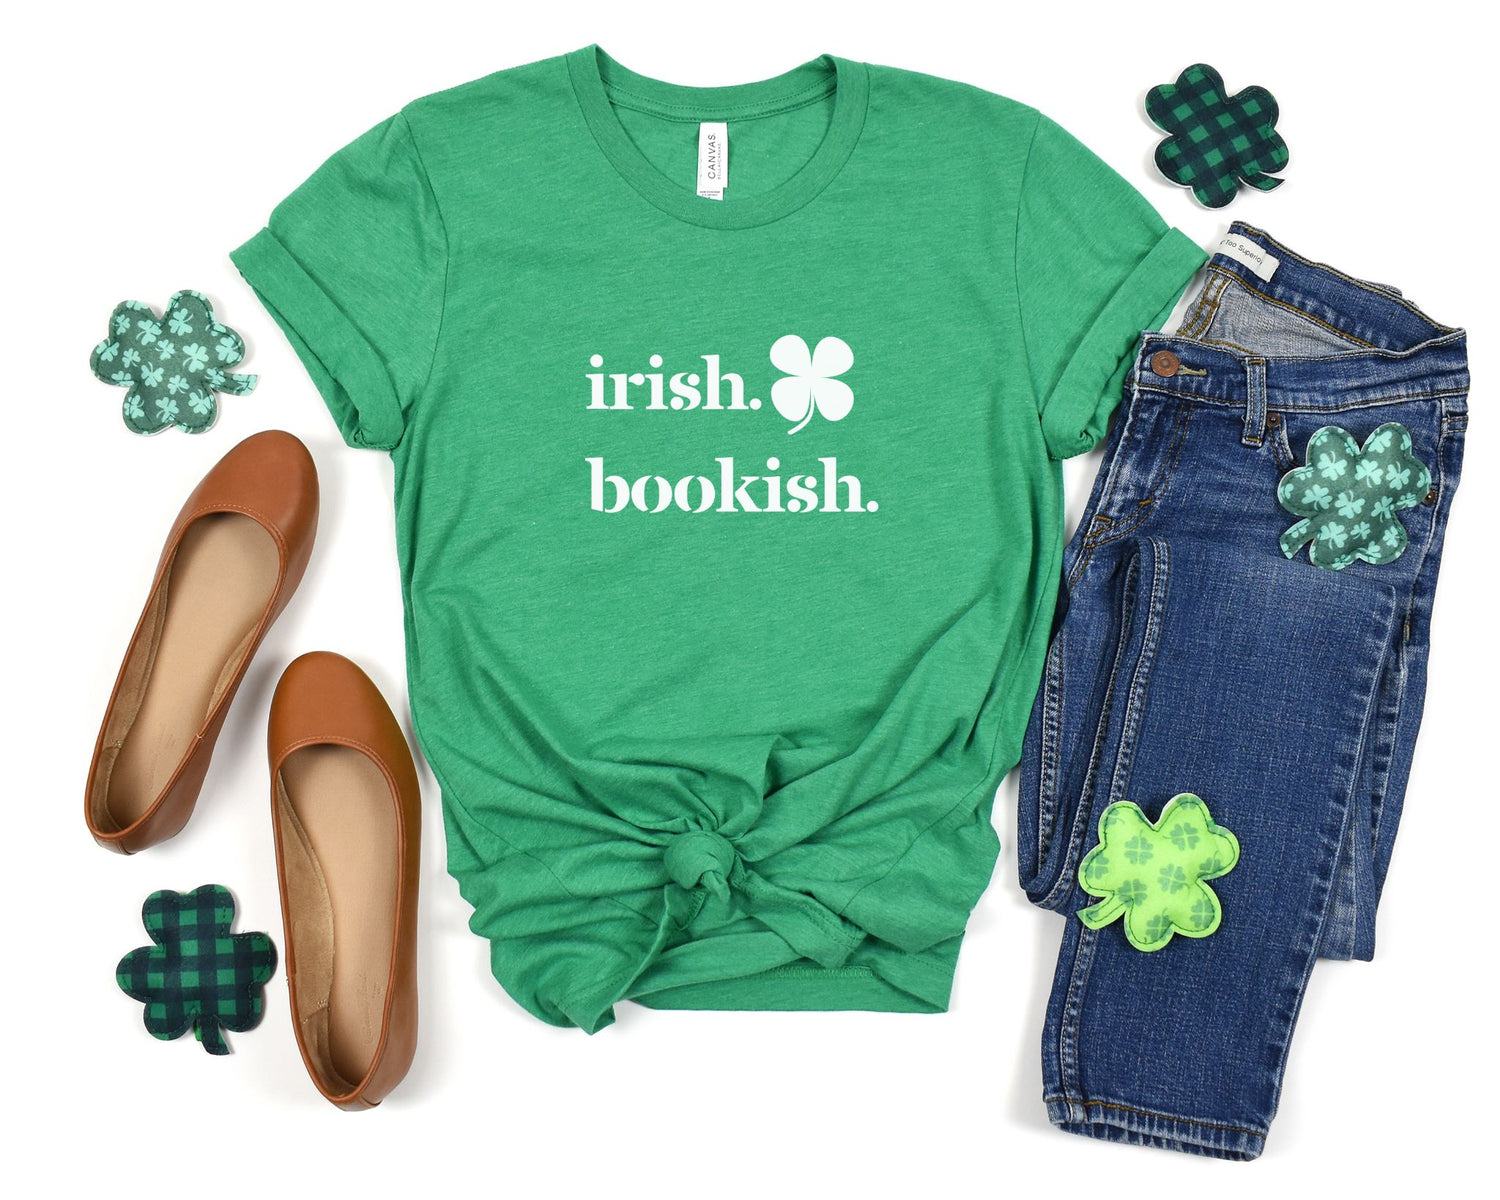 White "Irish & Bookish" design on a kelly green t-shirt surrounded by St. Patrick's Day-themed accessories.